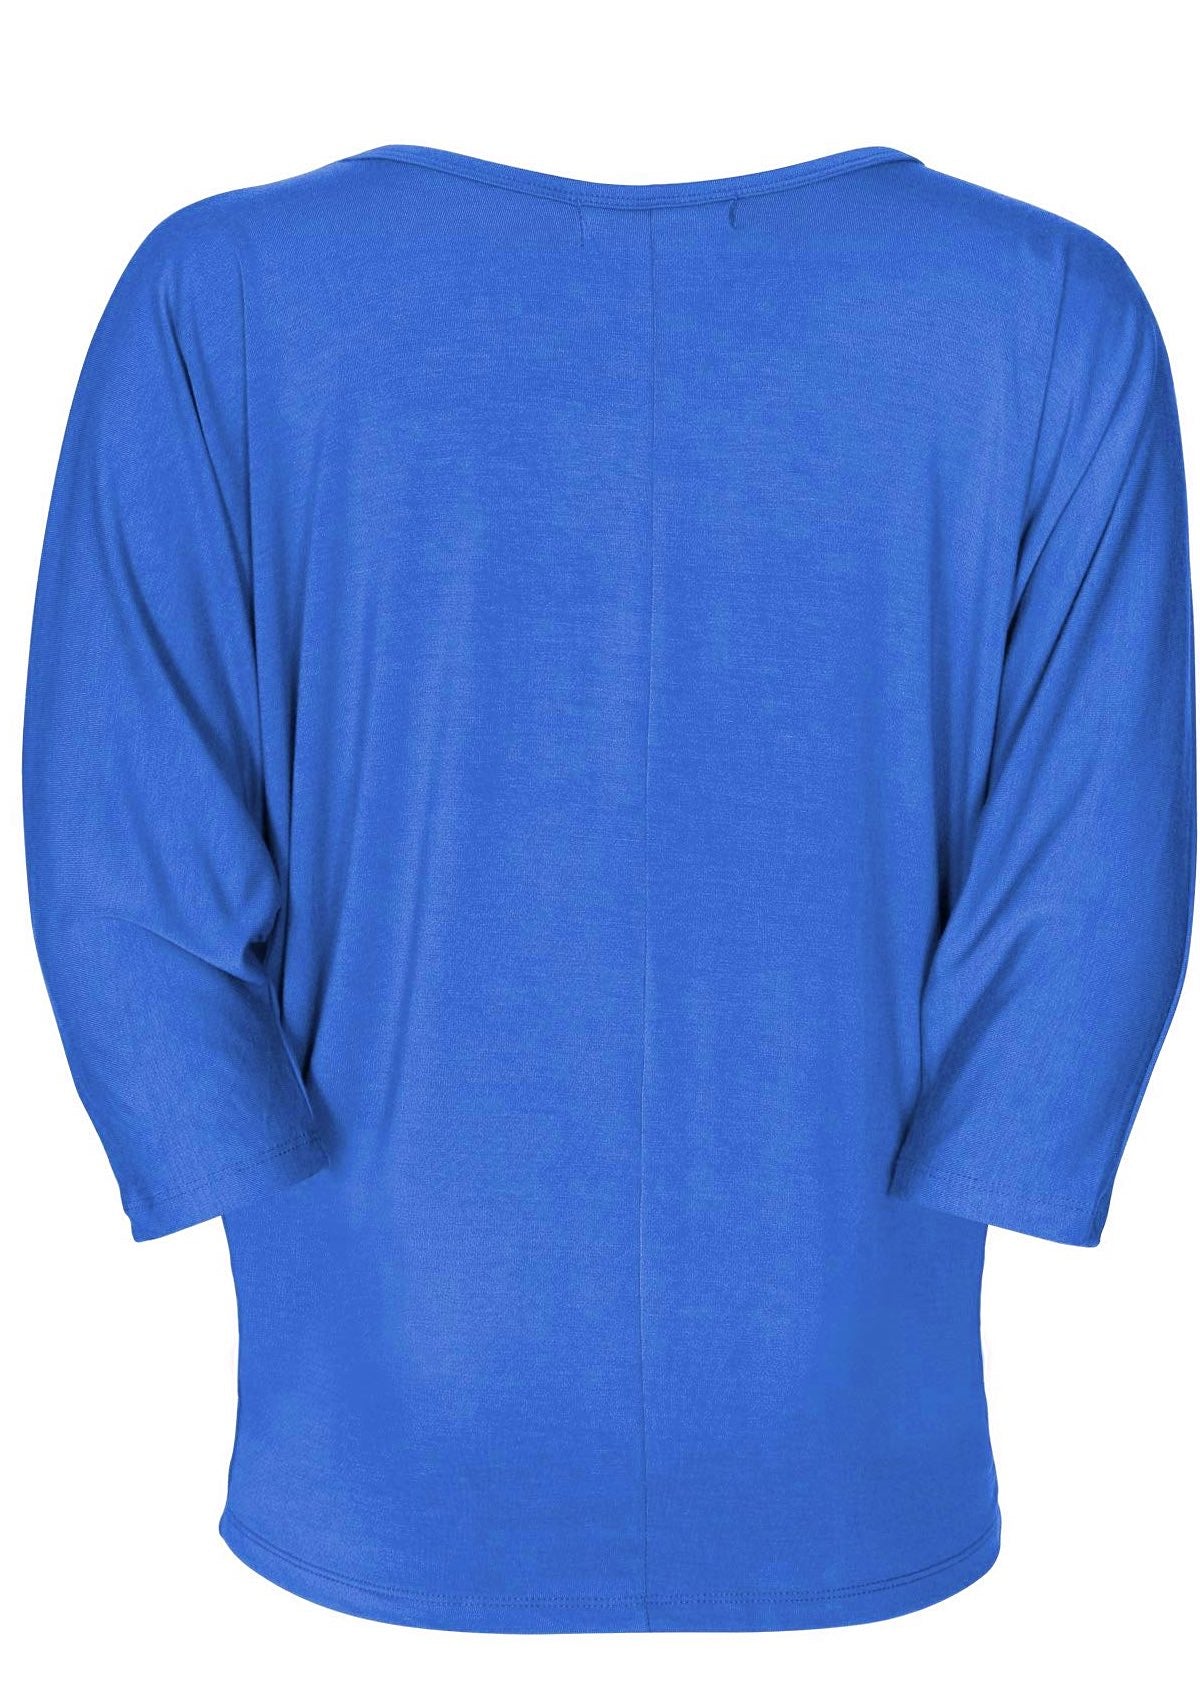 Back view women's 3/4 sleeve rayon batwing v-neck blue top.